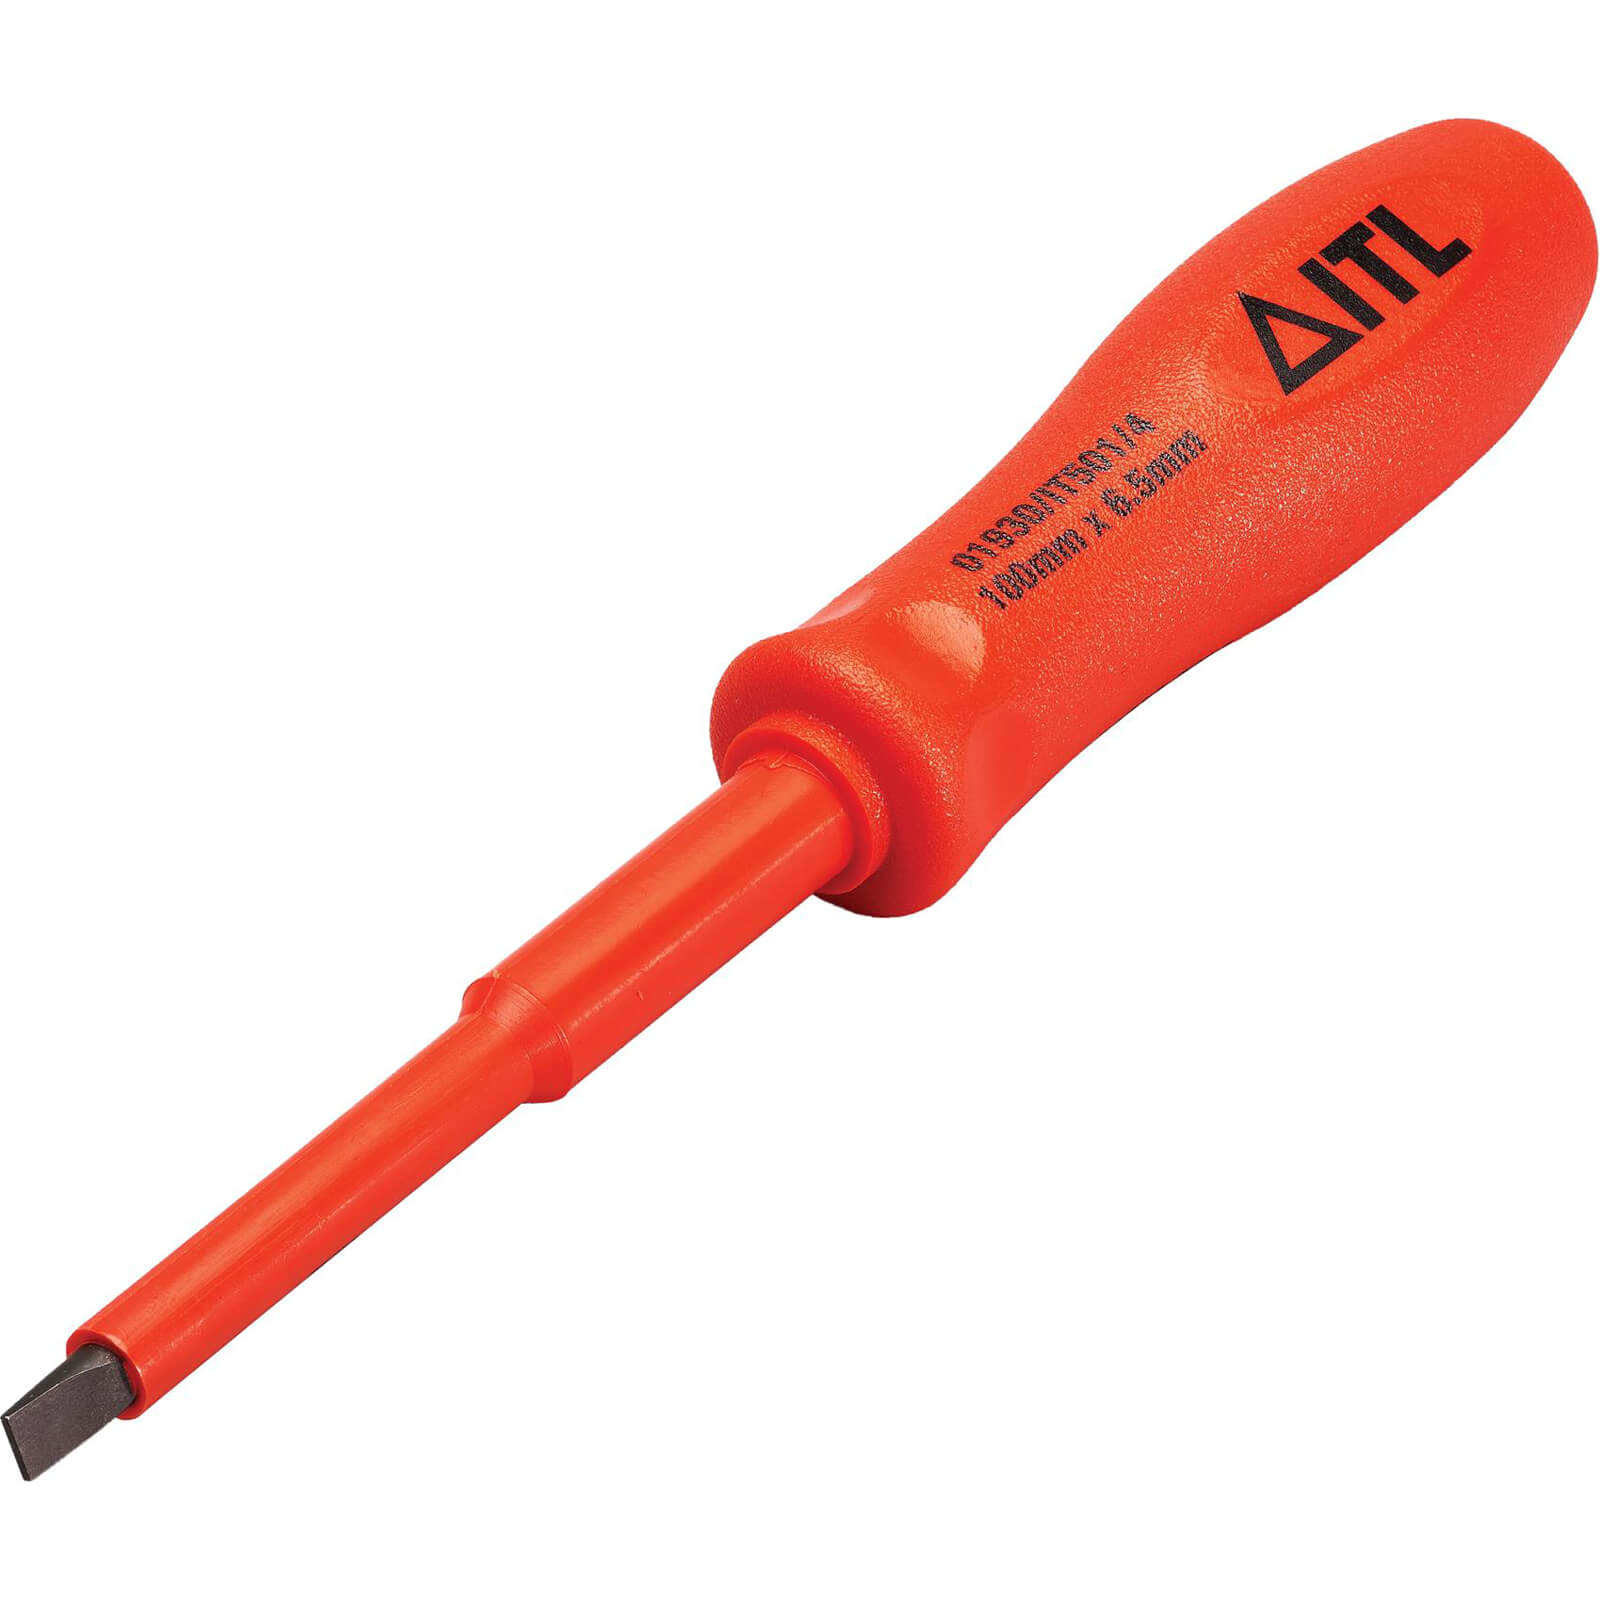 Photo of Itl Insulated Parallel Slotted Engineers Screwdriver 6.5mm 100mm